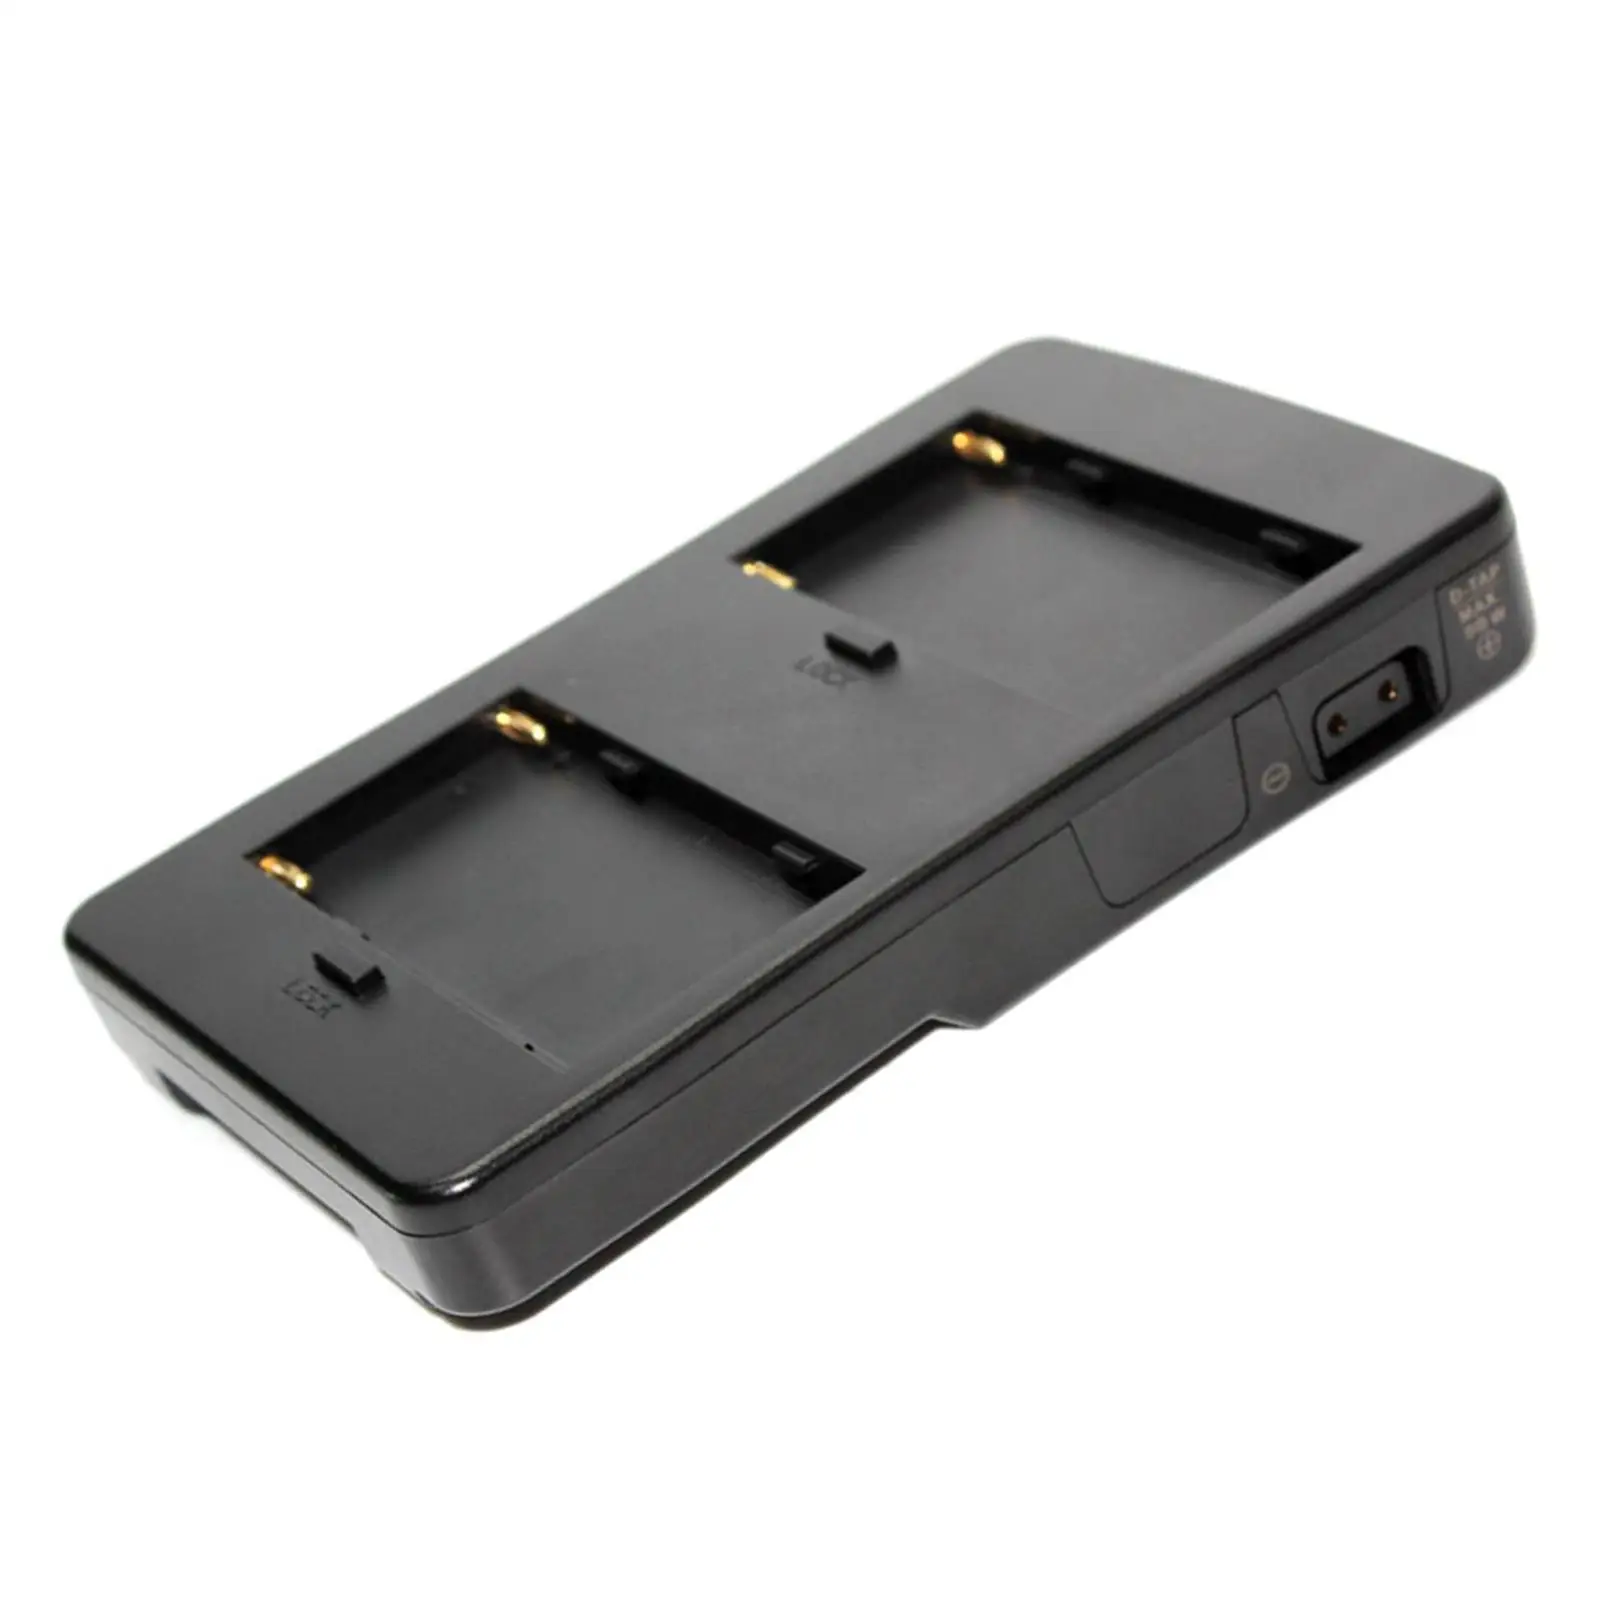 Np-F970 to V Mount Battery Converter Adapter Multifunctional Camera Accessories Professional Plastic Durable for Field Monitor